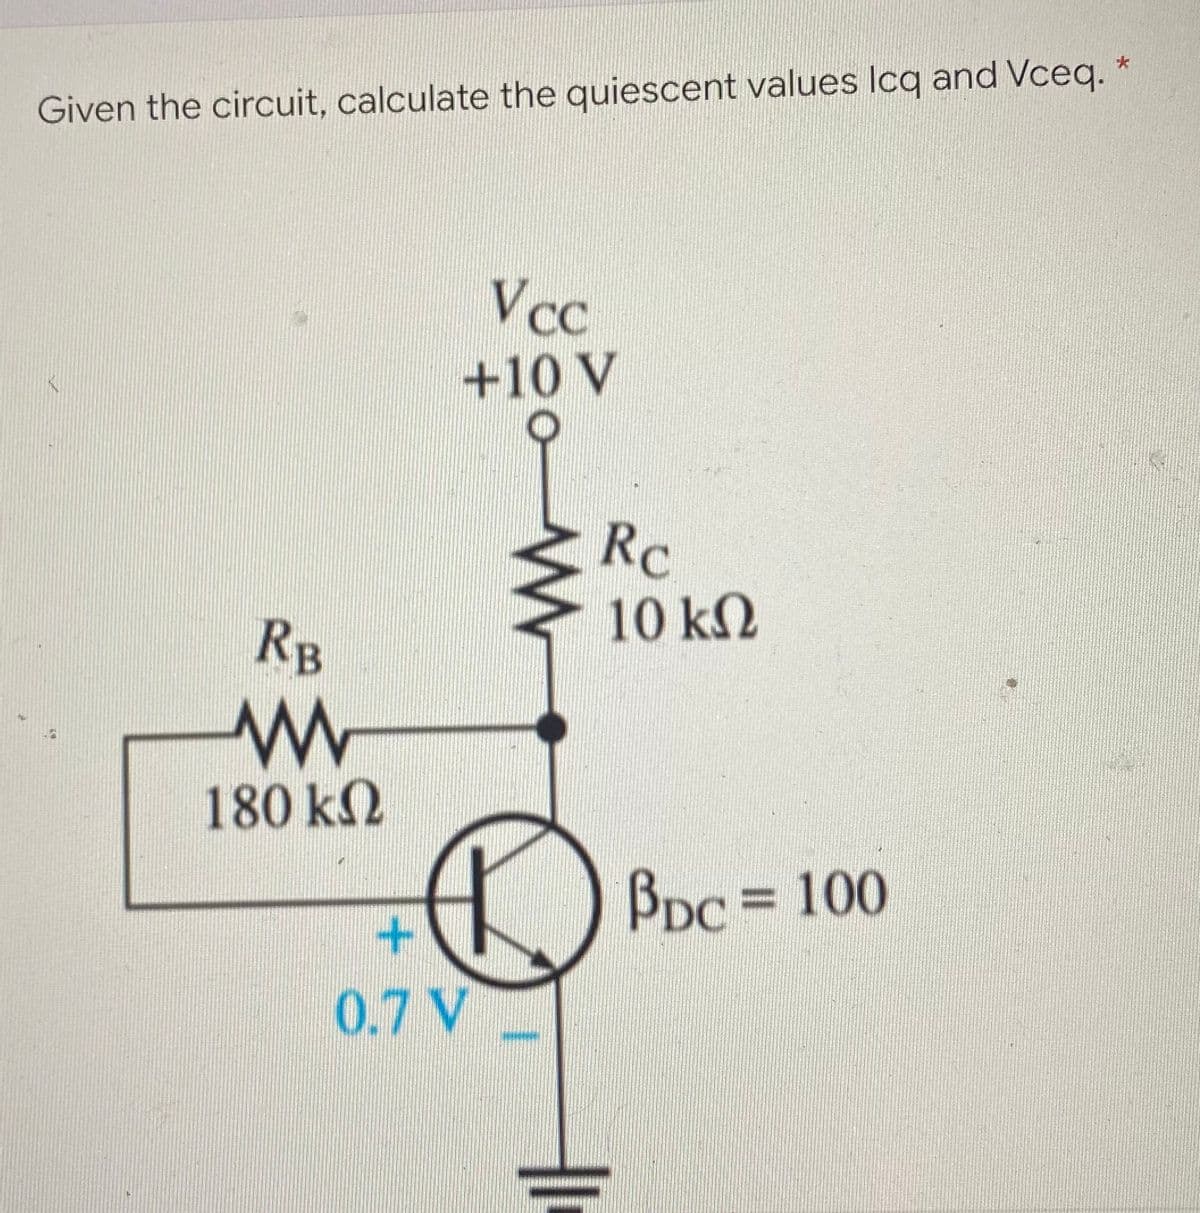 Given the circuit, calculate the quiescent values Icq and Vceq.
Vcc
+10 V
Rc
10 k2
RB
180k2
BDc%=D 100
0.7 V
